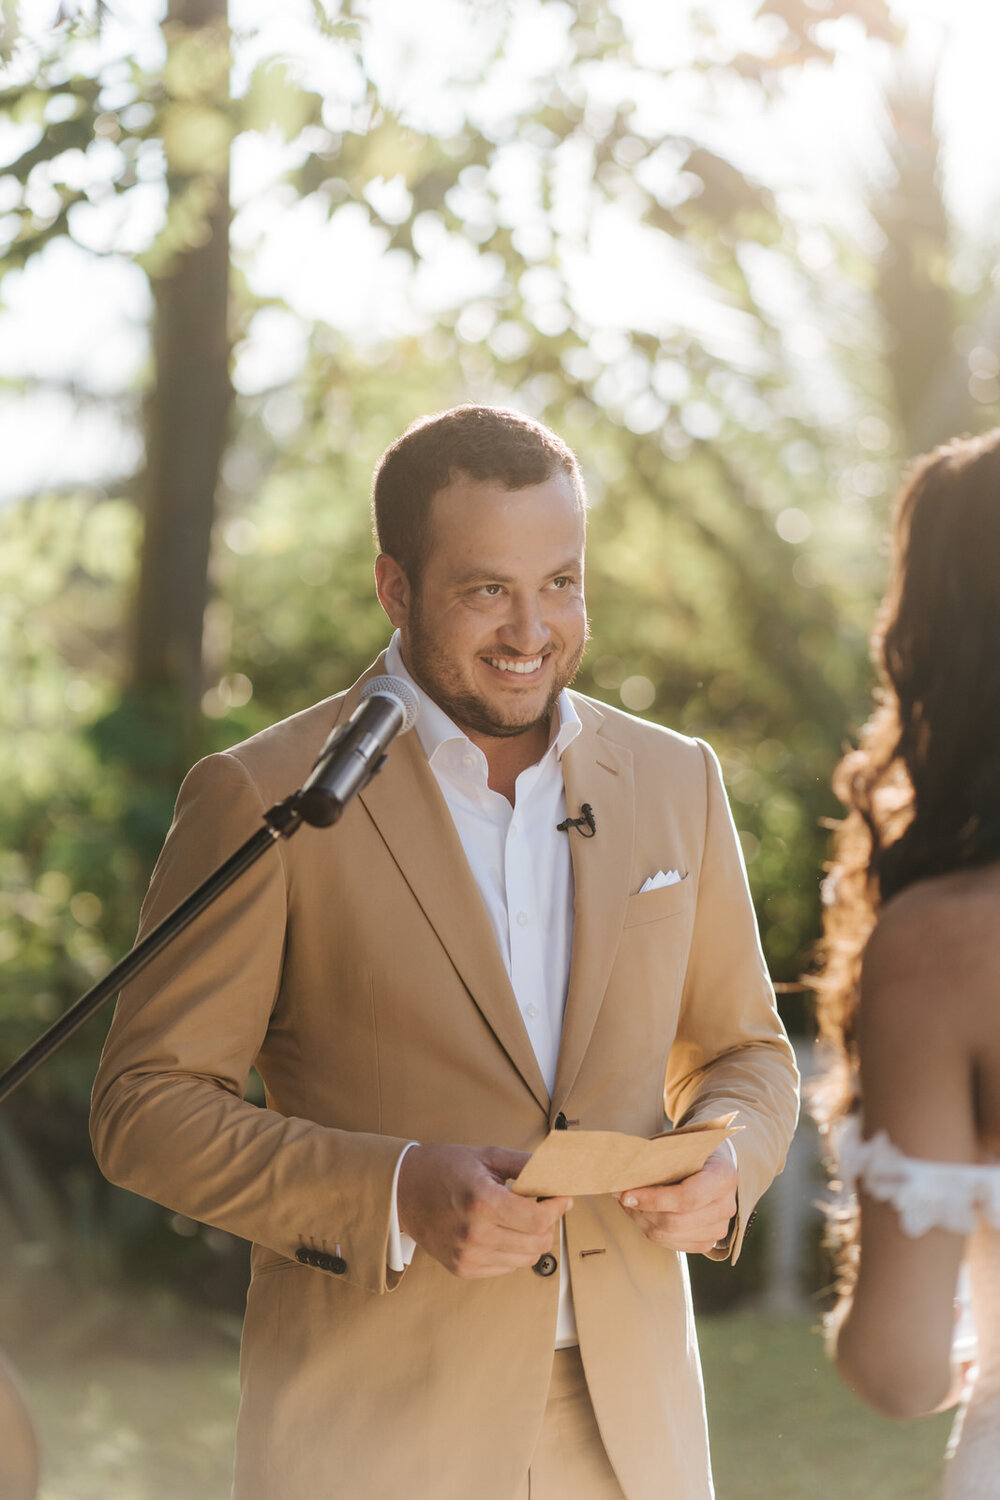 Grooms is very excited in sunlit photograph as he is about to start reading vows during outdoor Puerto Rican ceremony